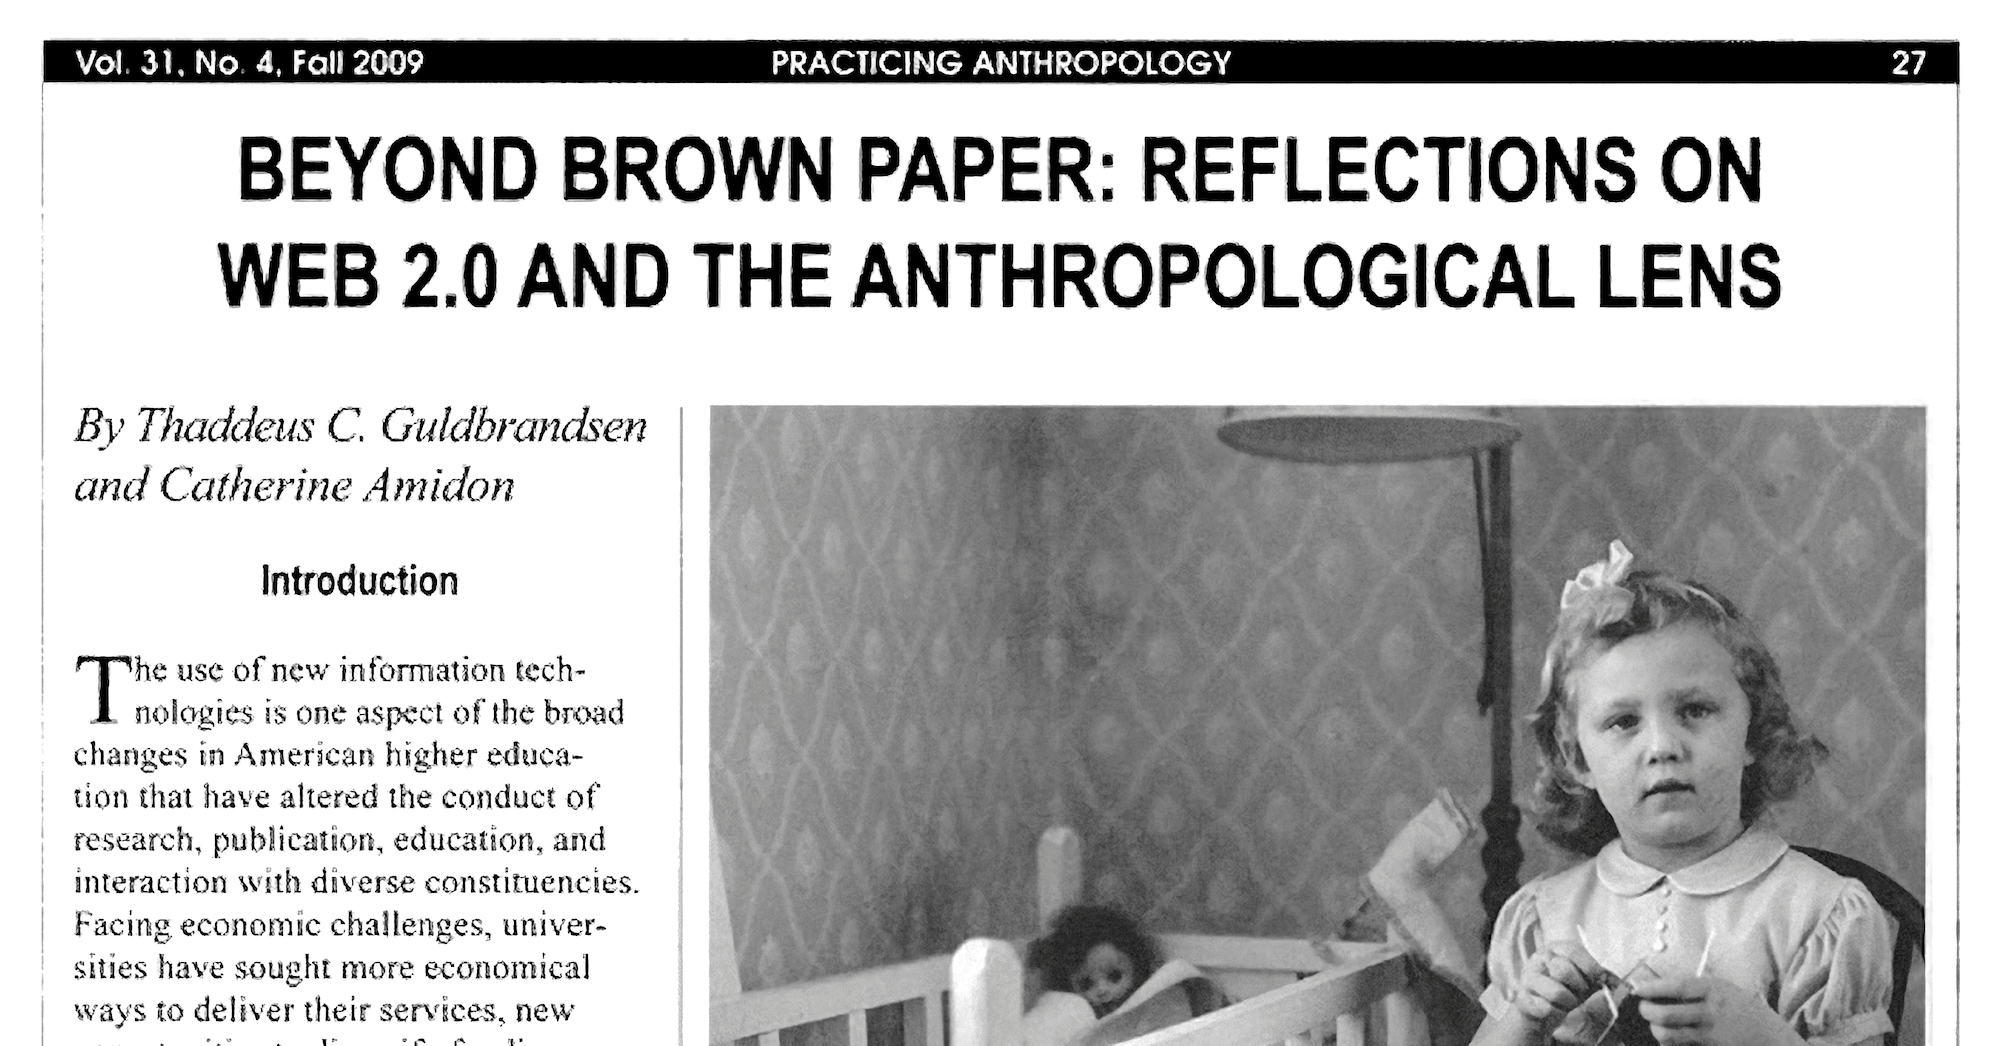 A sample of the article as it appeared in The Journal of Practicing Anthropology&rsquo;s fall 2009 issue.